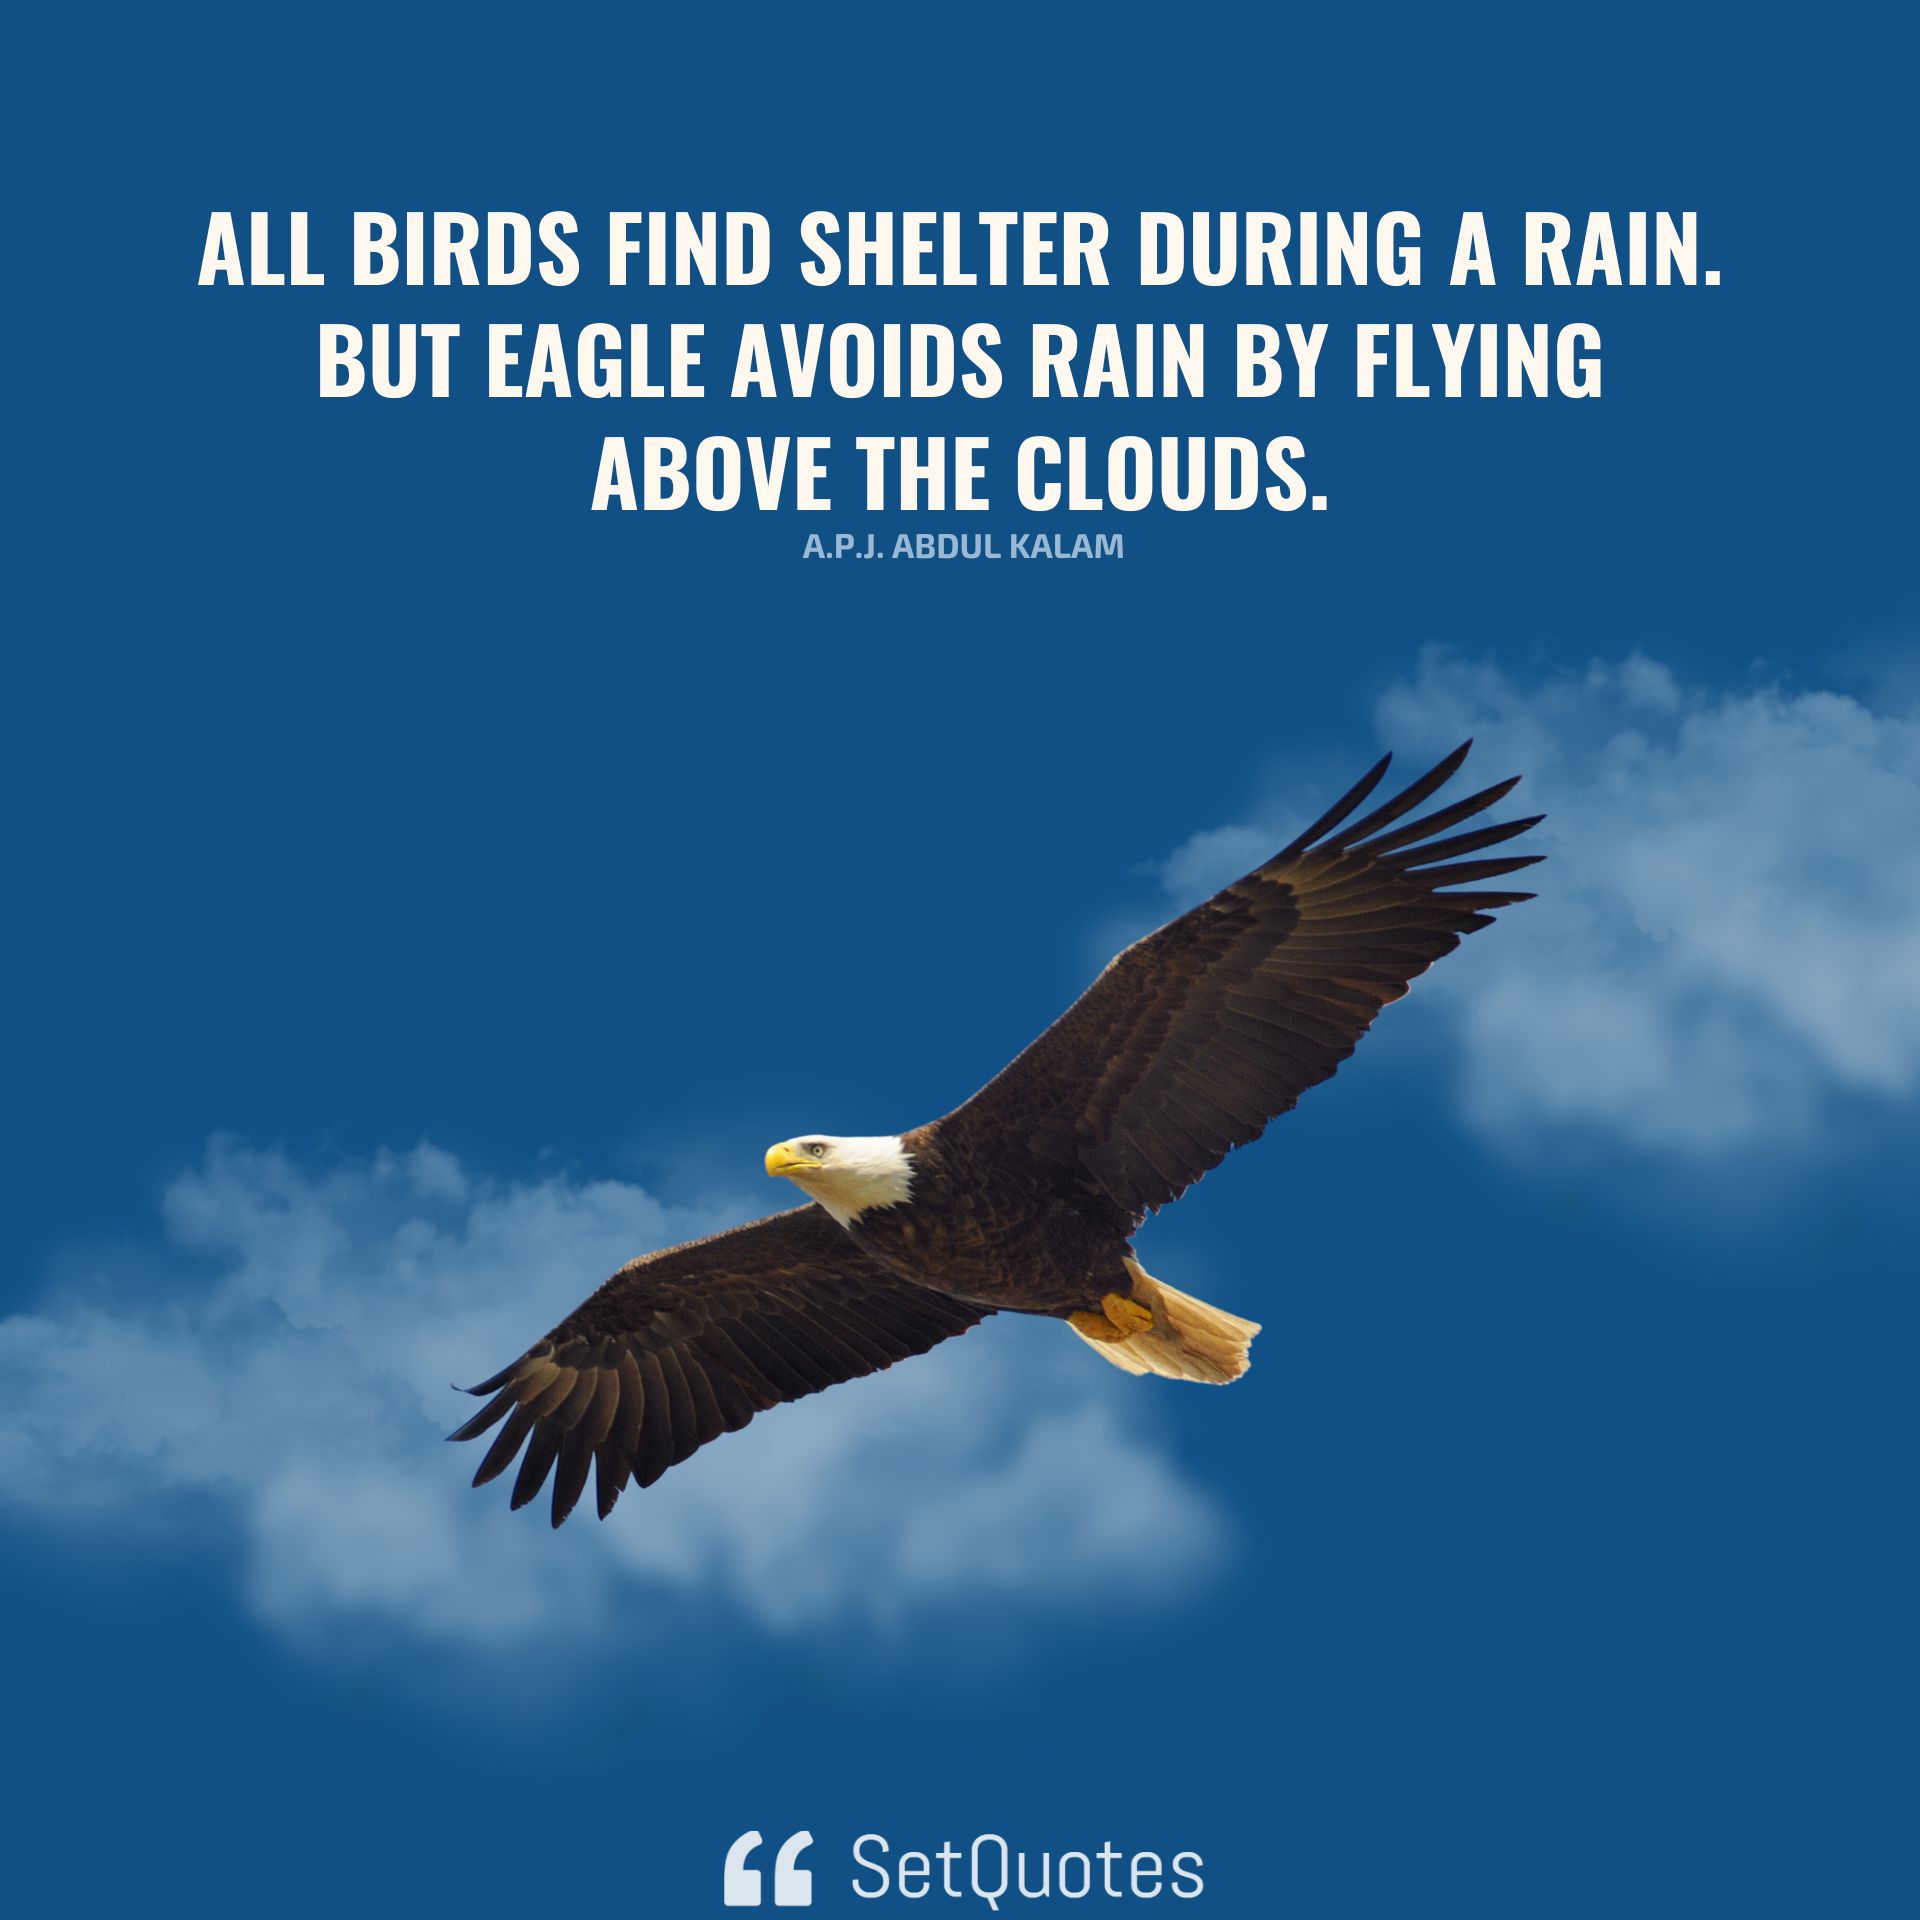 All birds find shelter during a rain. But eagle avoids rain by flying above the clouds. – A.P.J. Abdul Kalam - SetQuotes - 2023